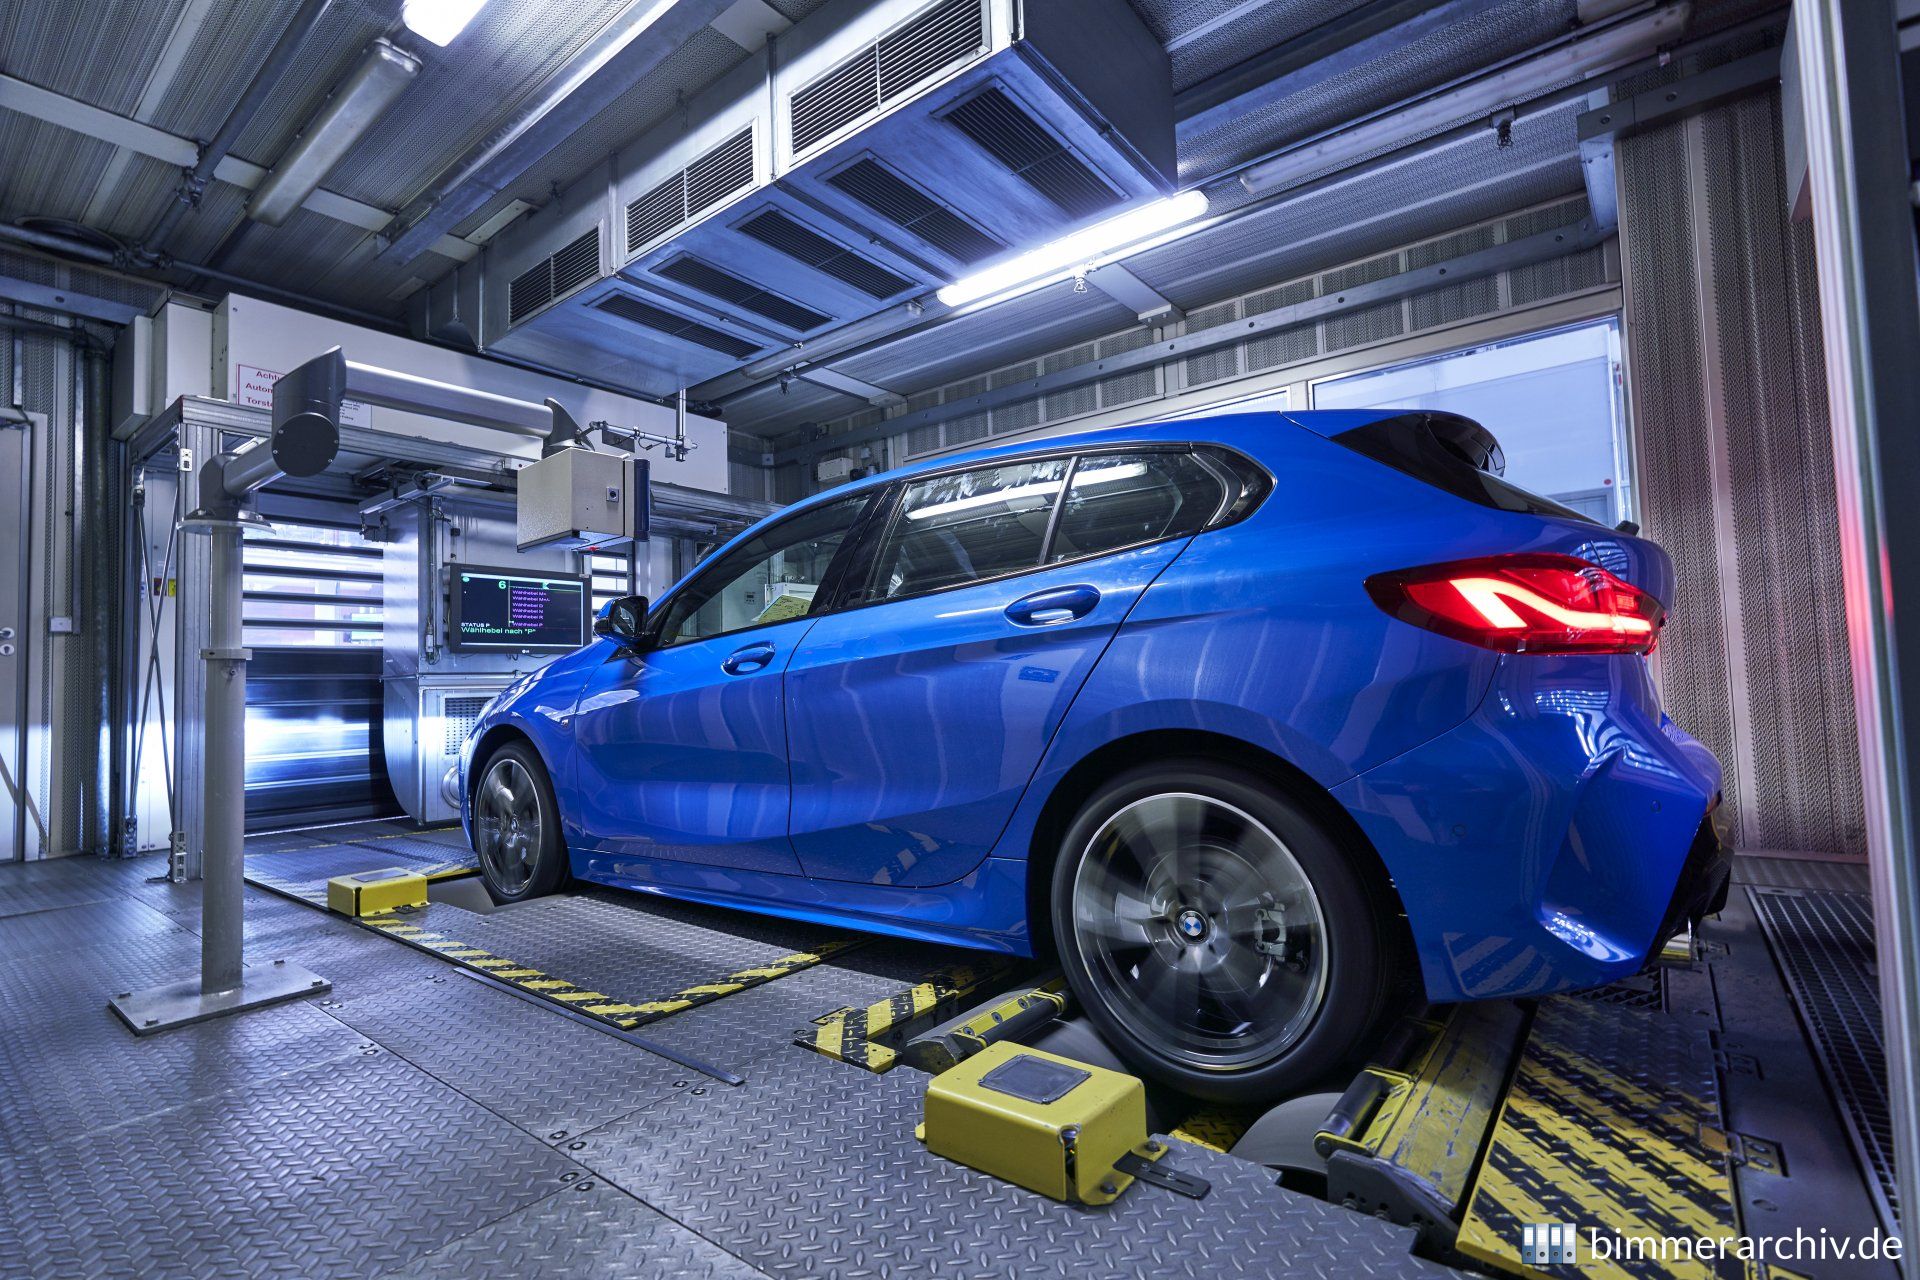 BMW 1 Series in the Assembly